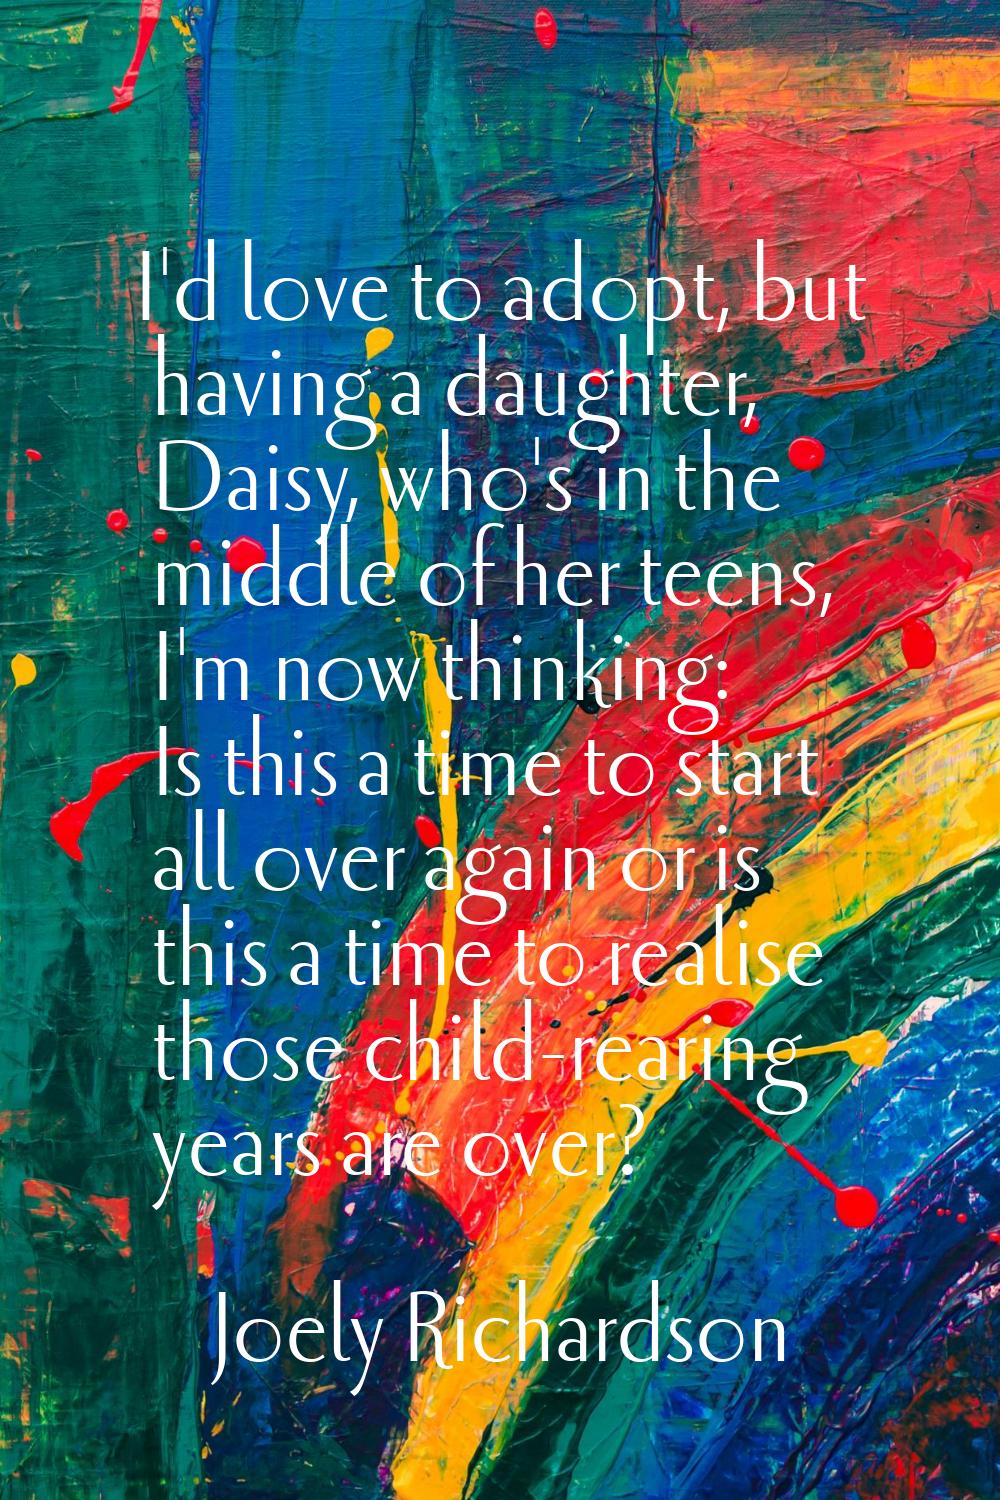 I'd love to adopt, but having a daughter, Daisy, who's in the middle of her teens, I'm now thinking